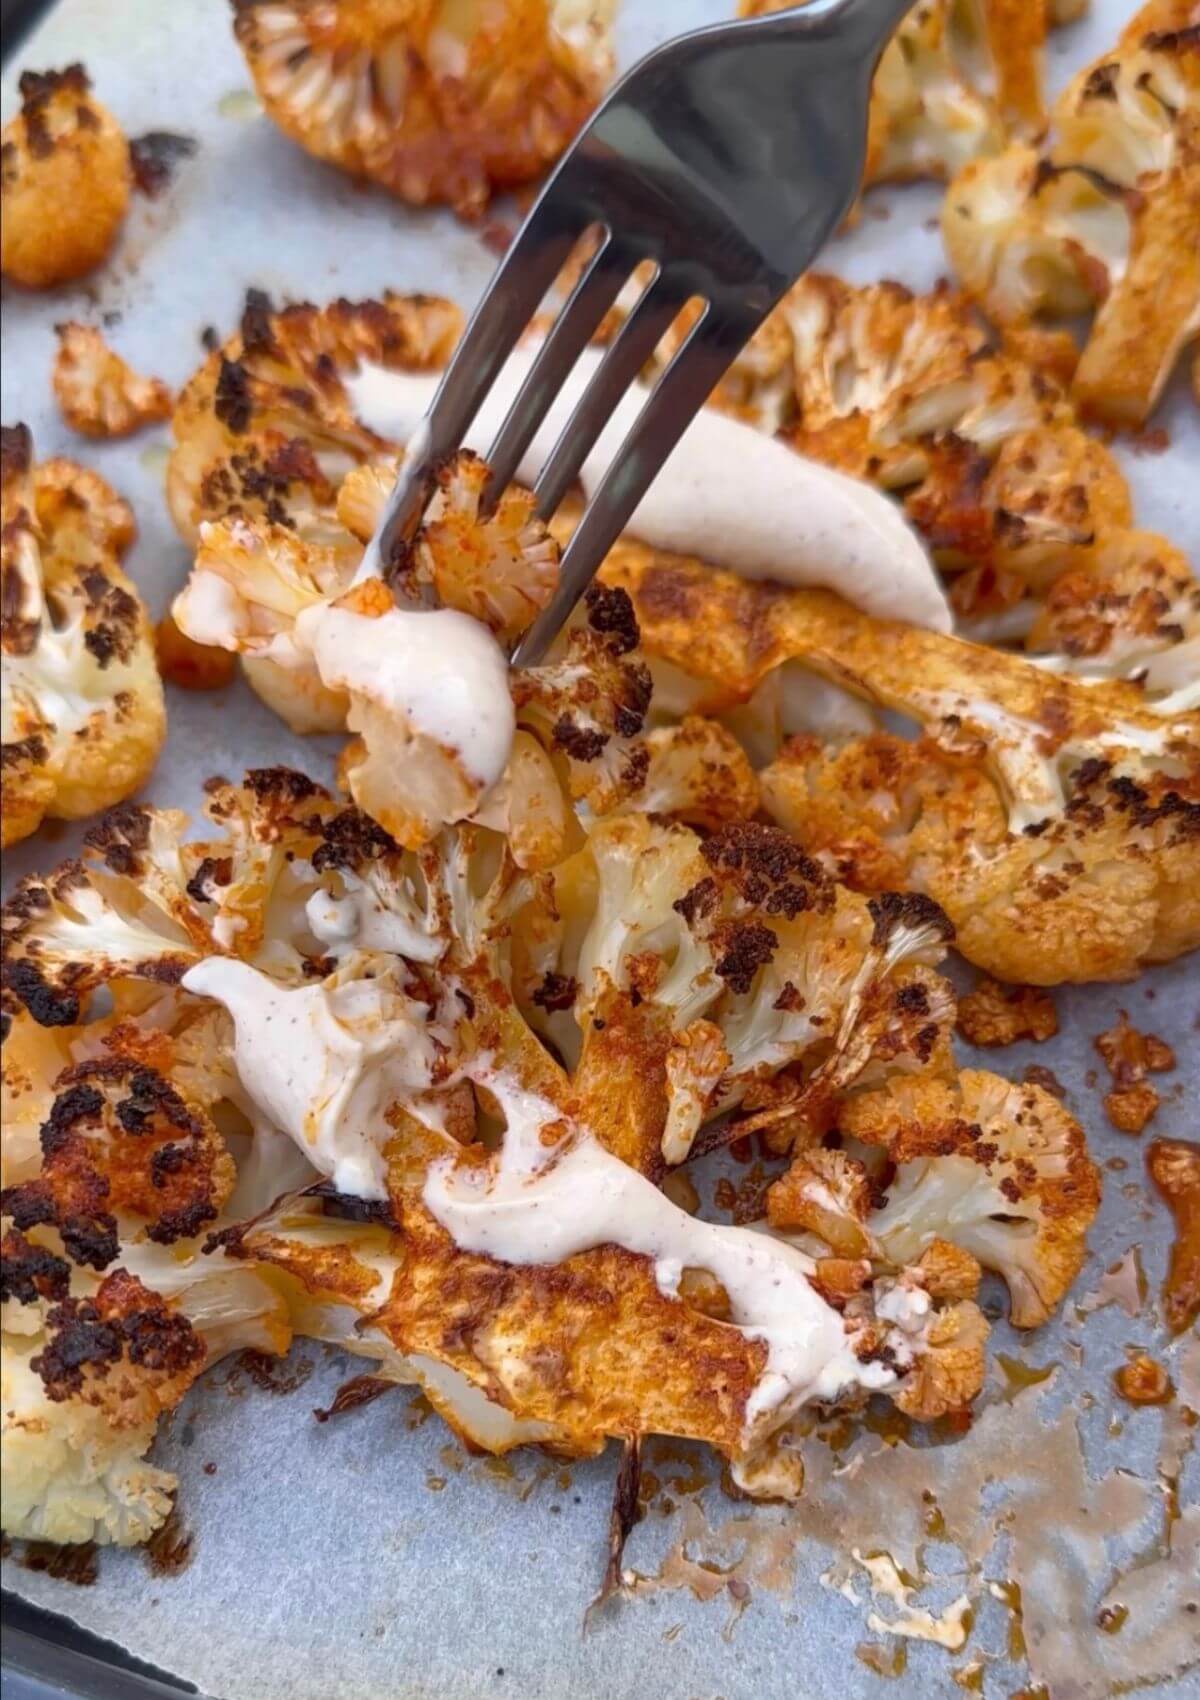 Roasted Cauliflower Steaks with Creamy Tahini Sauce, garnished with fresh herbs and sesame seeds on a white plate.